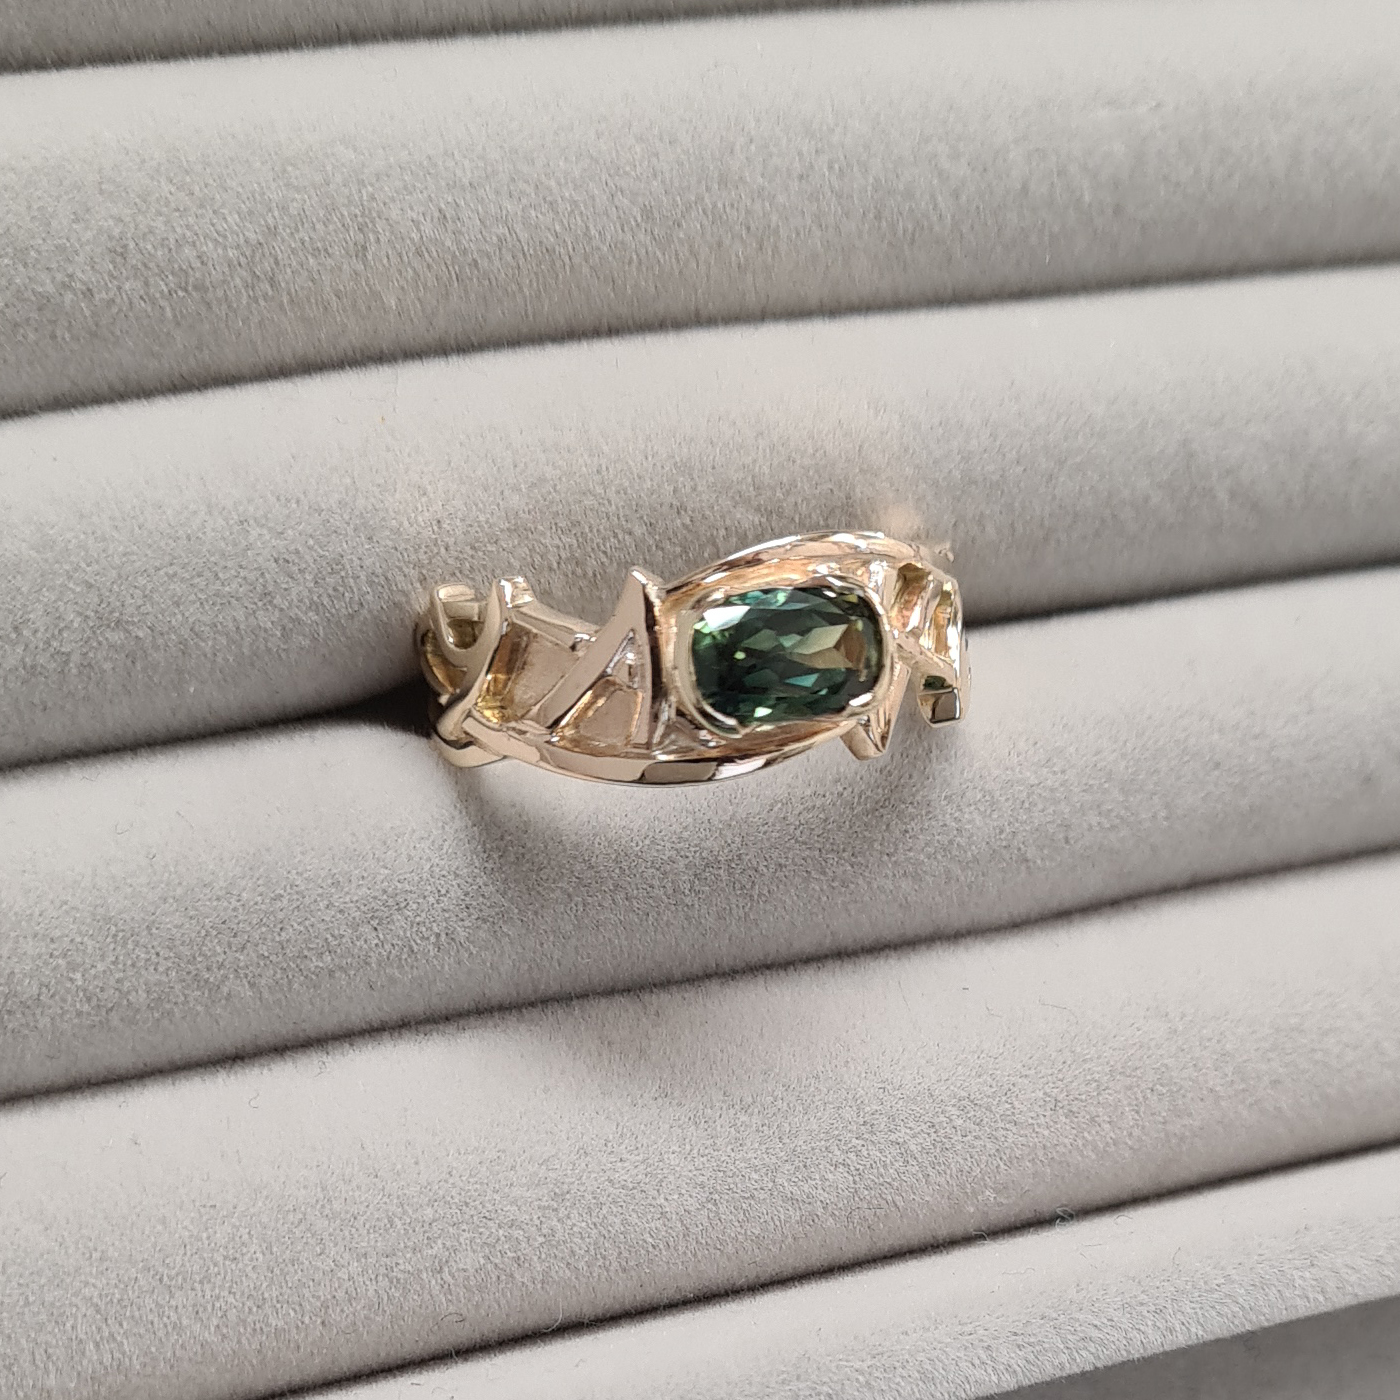 gold art nouveau ring with sculptural design of interweaving lines with a central blue-green sapphire, on a grey background